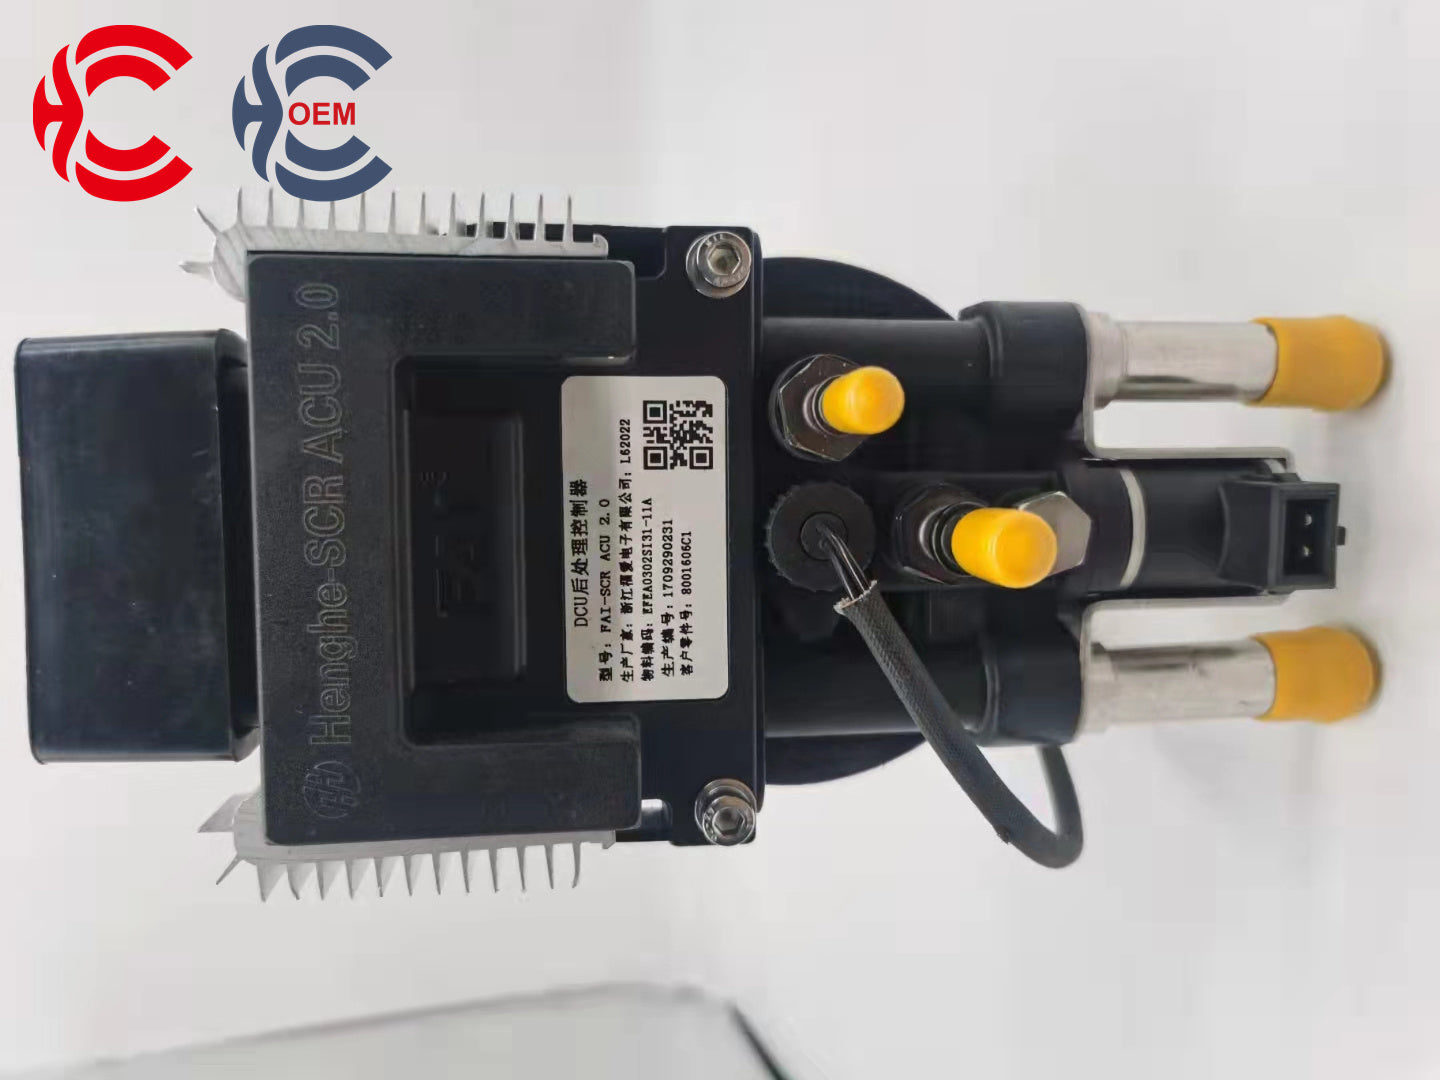 OEM: EFEA0302SI31-11A HENGHE ACU2.0Material: ABS metalColor: black silverOrigin: Made in ChinaWeight: 1000gPacking List: 1* Adblue Pump More ServiceWe can provide OEM Manufacturing serviceWe can Be your one-step solution for Auto PartsWe can provide technical scheme for you Feel Free to Contact Us, We will get back to you as soon as possible.